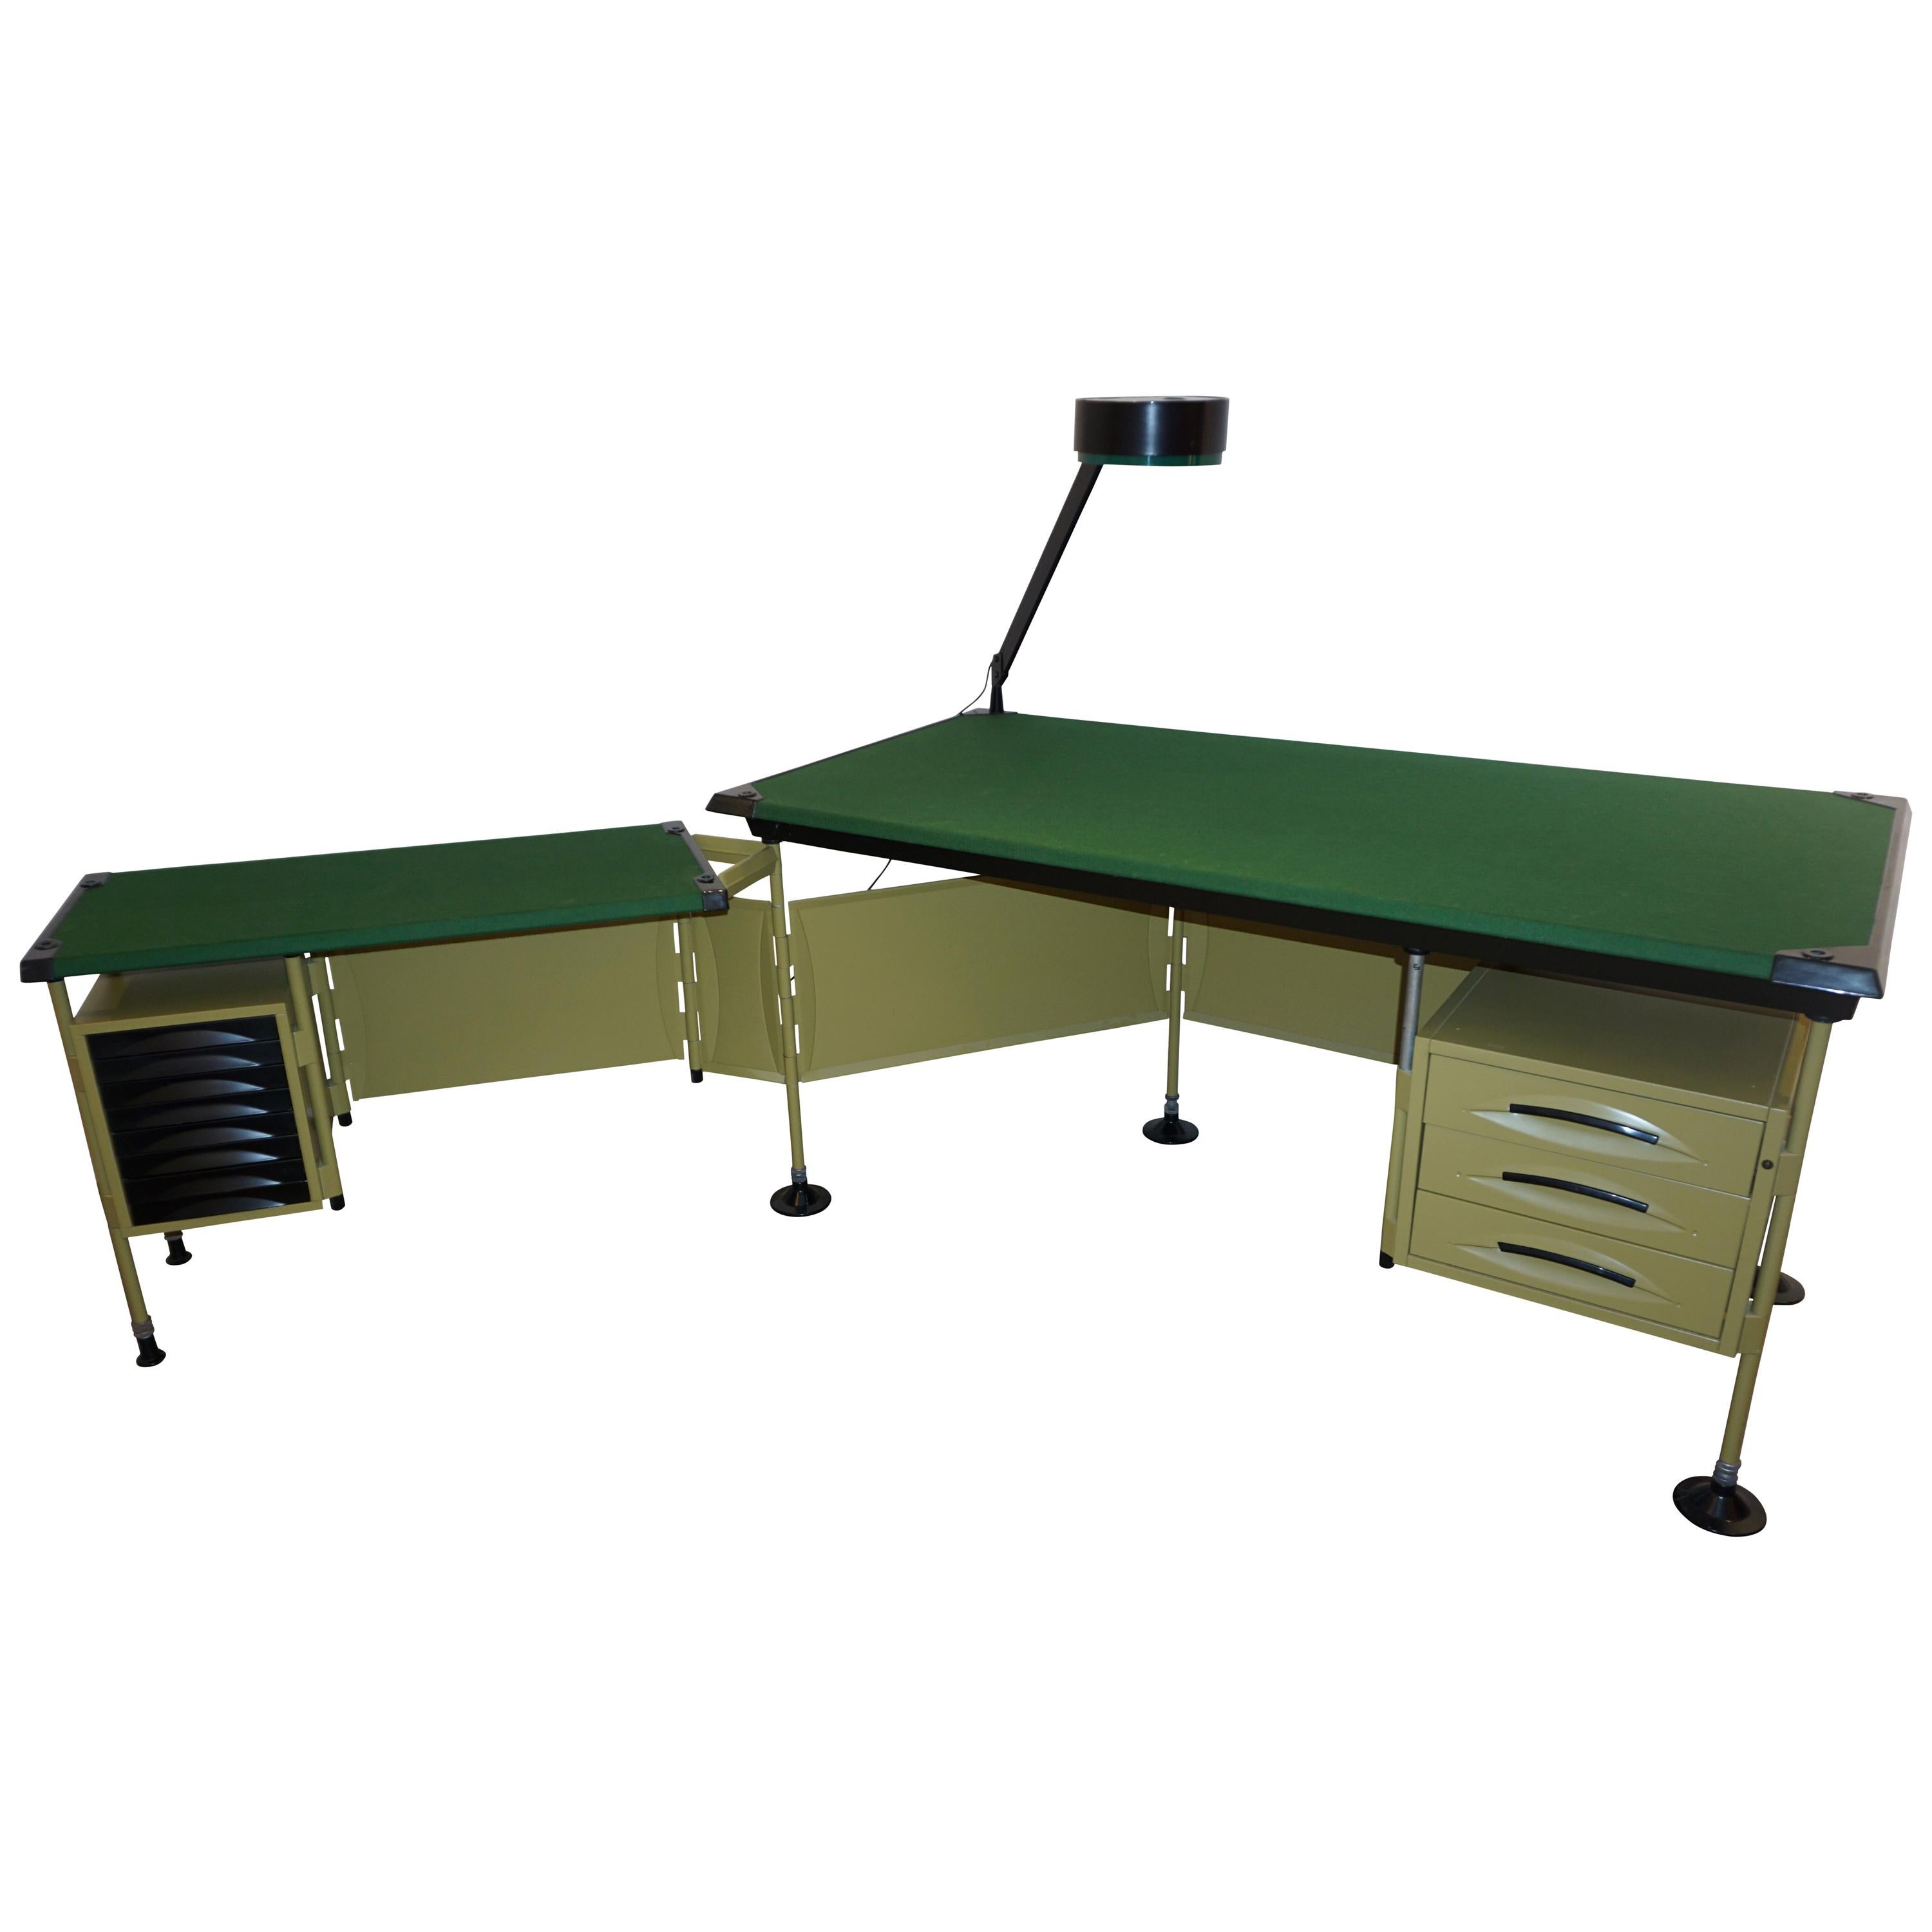 BBPR for Olivetti 1960 Green Modernist Desk with Black Accents and Side Bureau